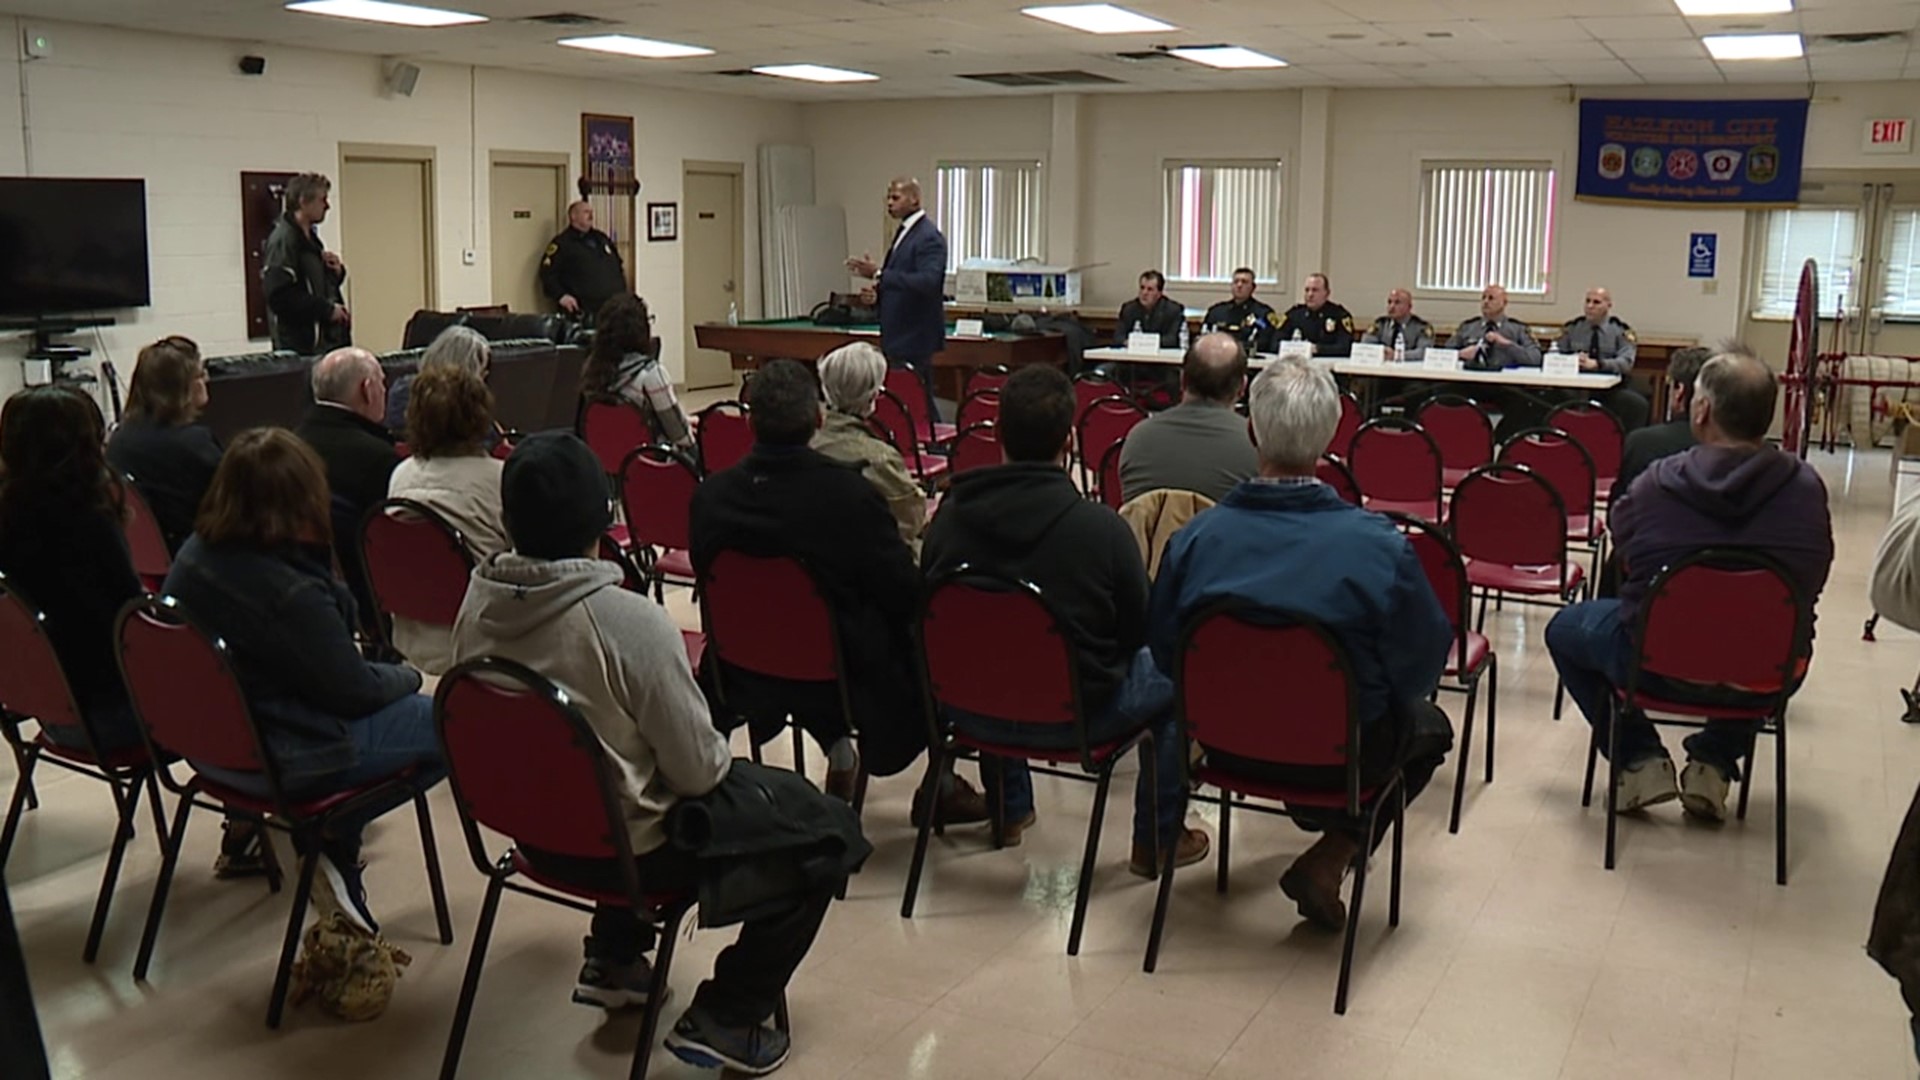 Pennsylvania State Police in Hazleton found a way to connect with community members on Saturday as well as discuss crime and other issues in the city.